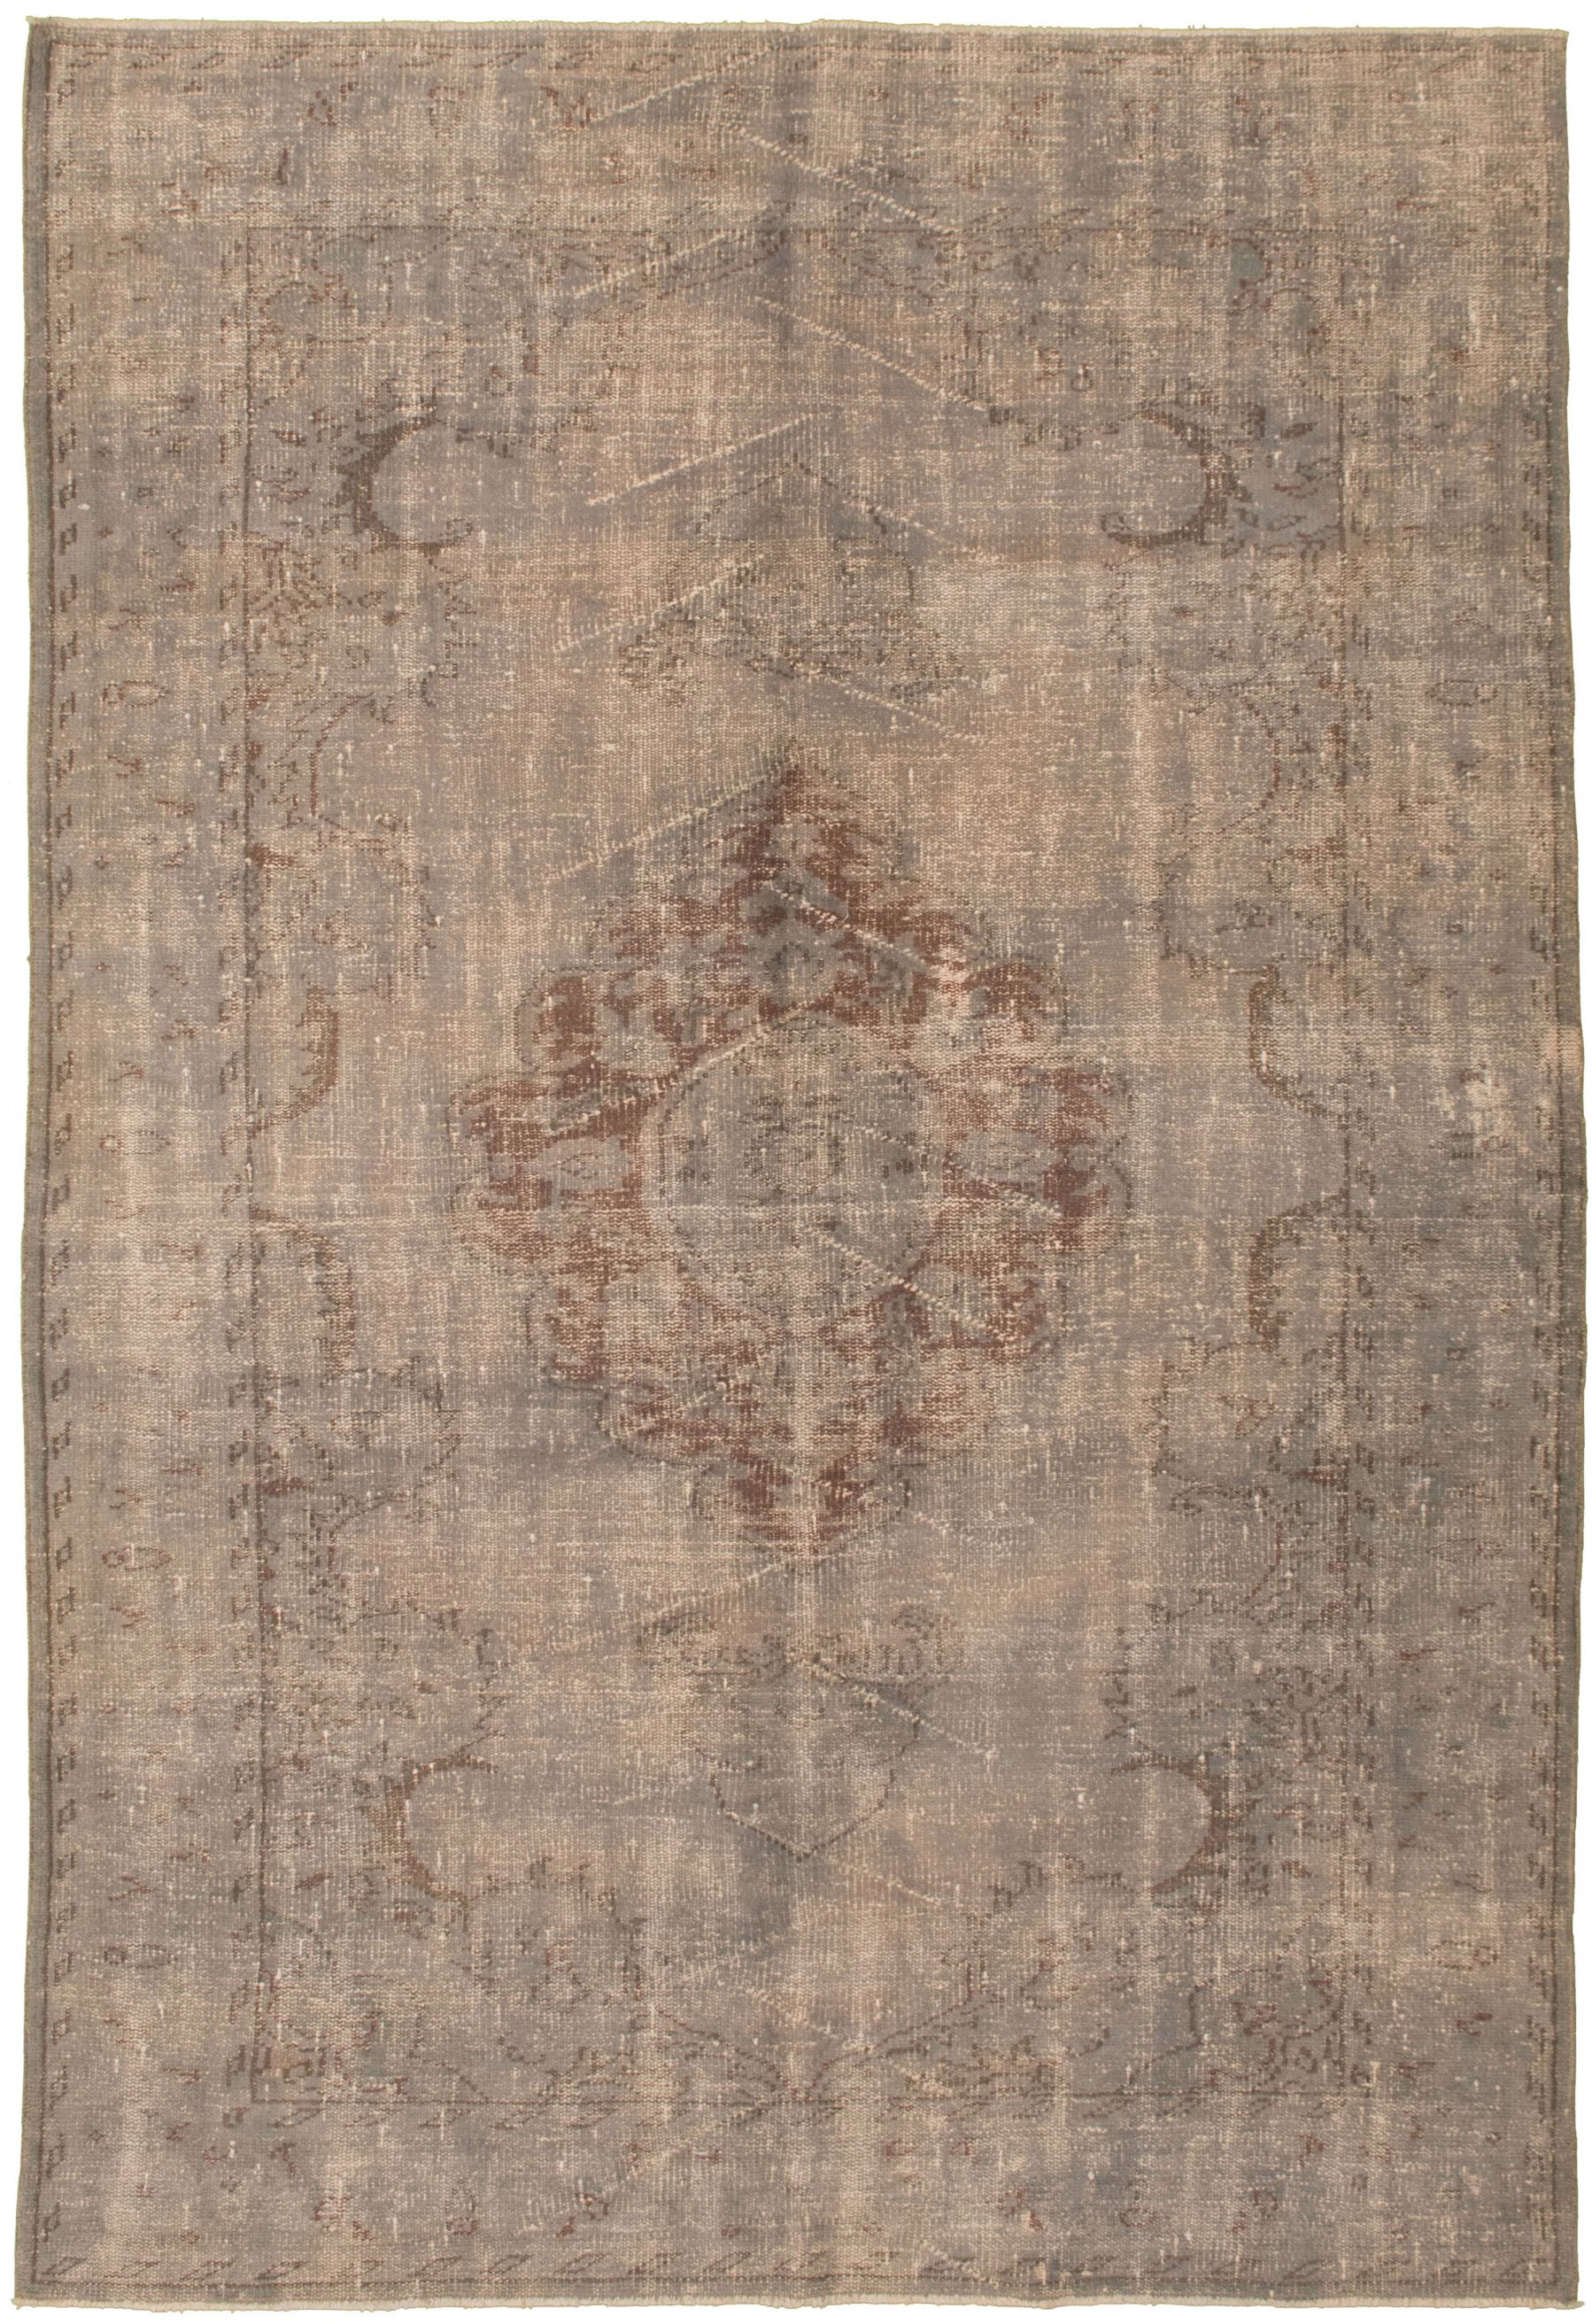 Hand-knotted Antalya Vintage Grey Wool Rug 6'2" x 9'7" Size: 6'2" x 9'7"  